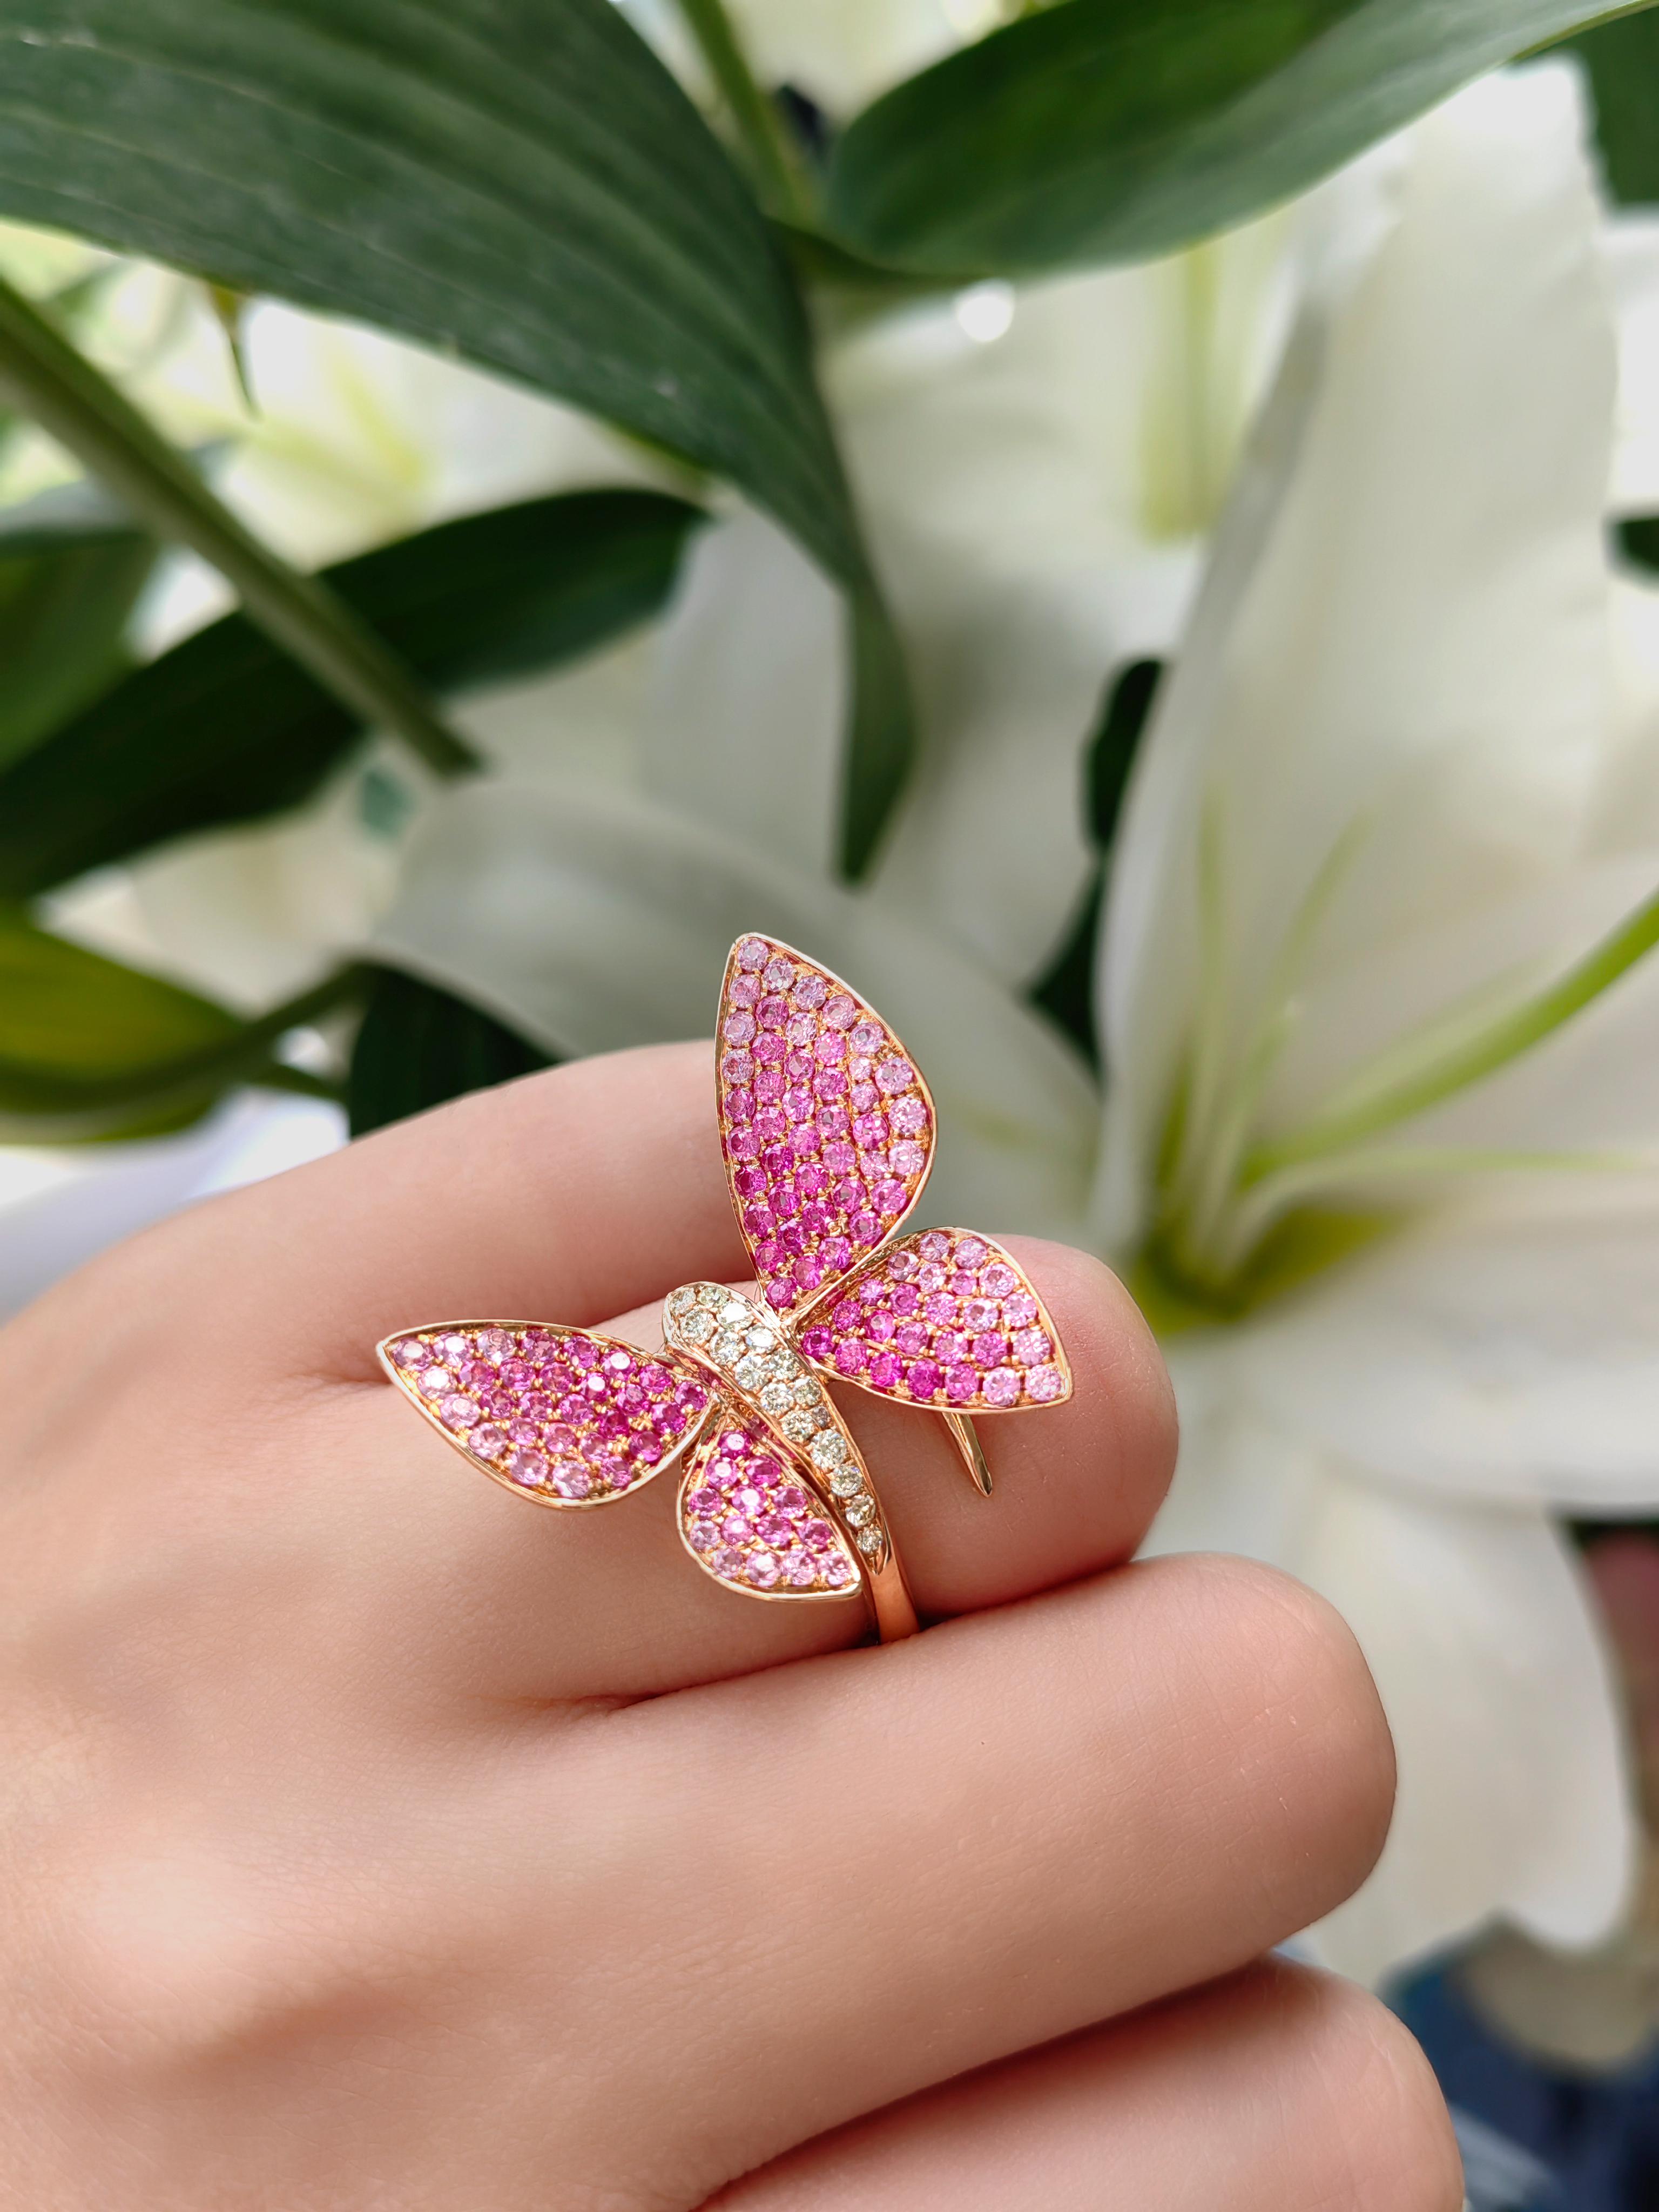 18K Rose Gold Butterfly Garden Pink Sapphire Diamond Open Cocktail Ring
US Size: 6.5

16 Colored Diamonds - 0.22 CT
109 Pink Sapphires - 2.46 CT
18K Rose Gold - 7.74 GM

109 Pink Sapphires make our butterfly ring so pretty and special. The open end